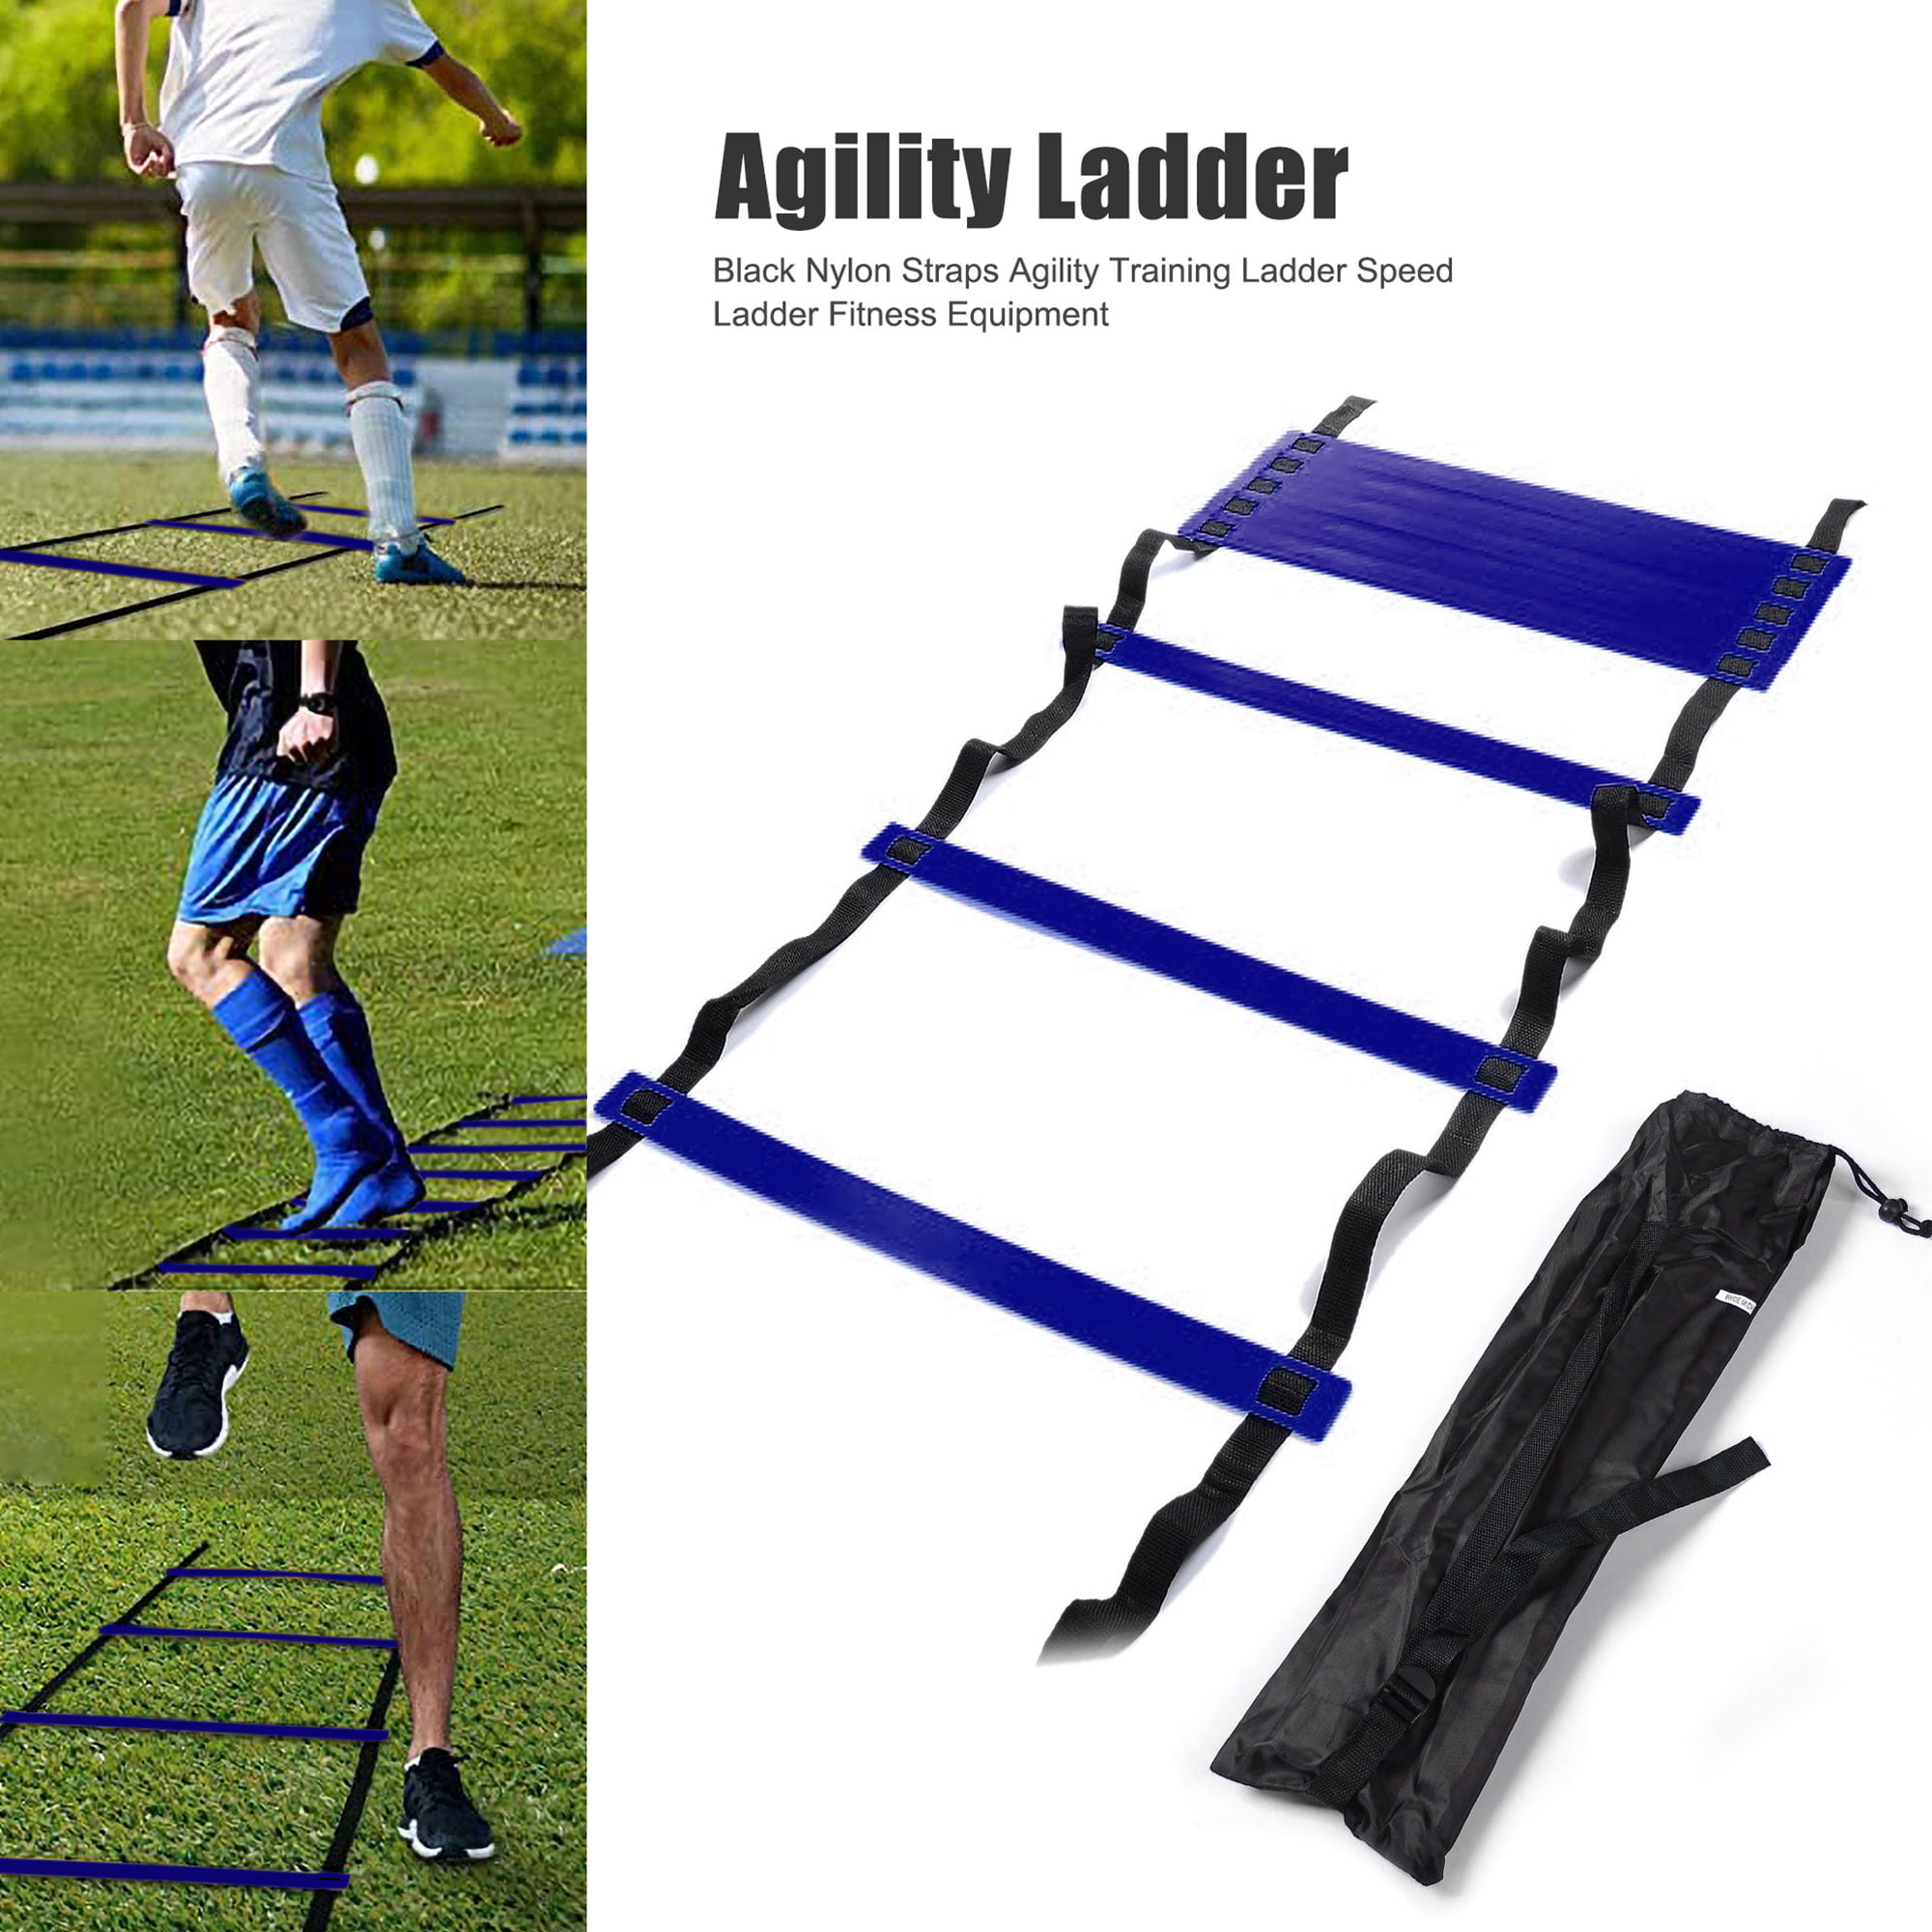 16 Rung  Speed Training Ladder Footwork Fitness Football Exercise Bag 